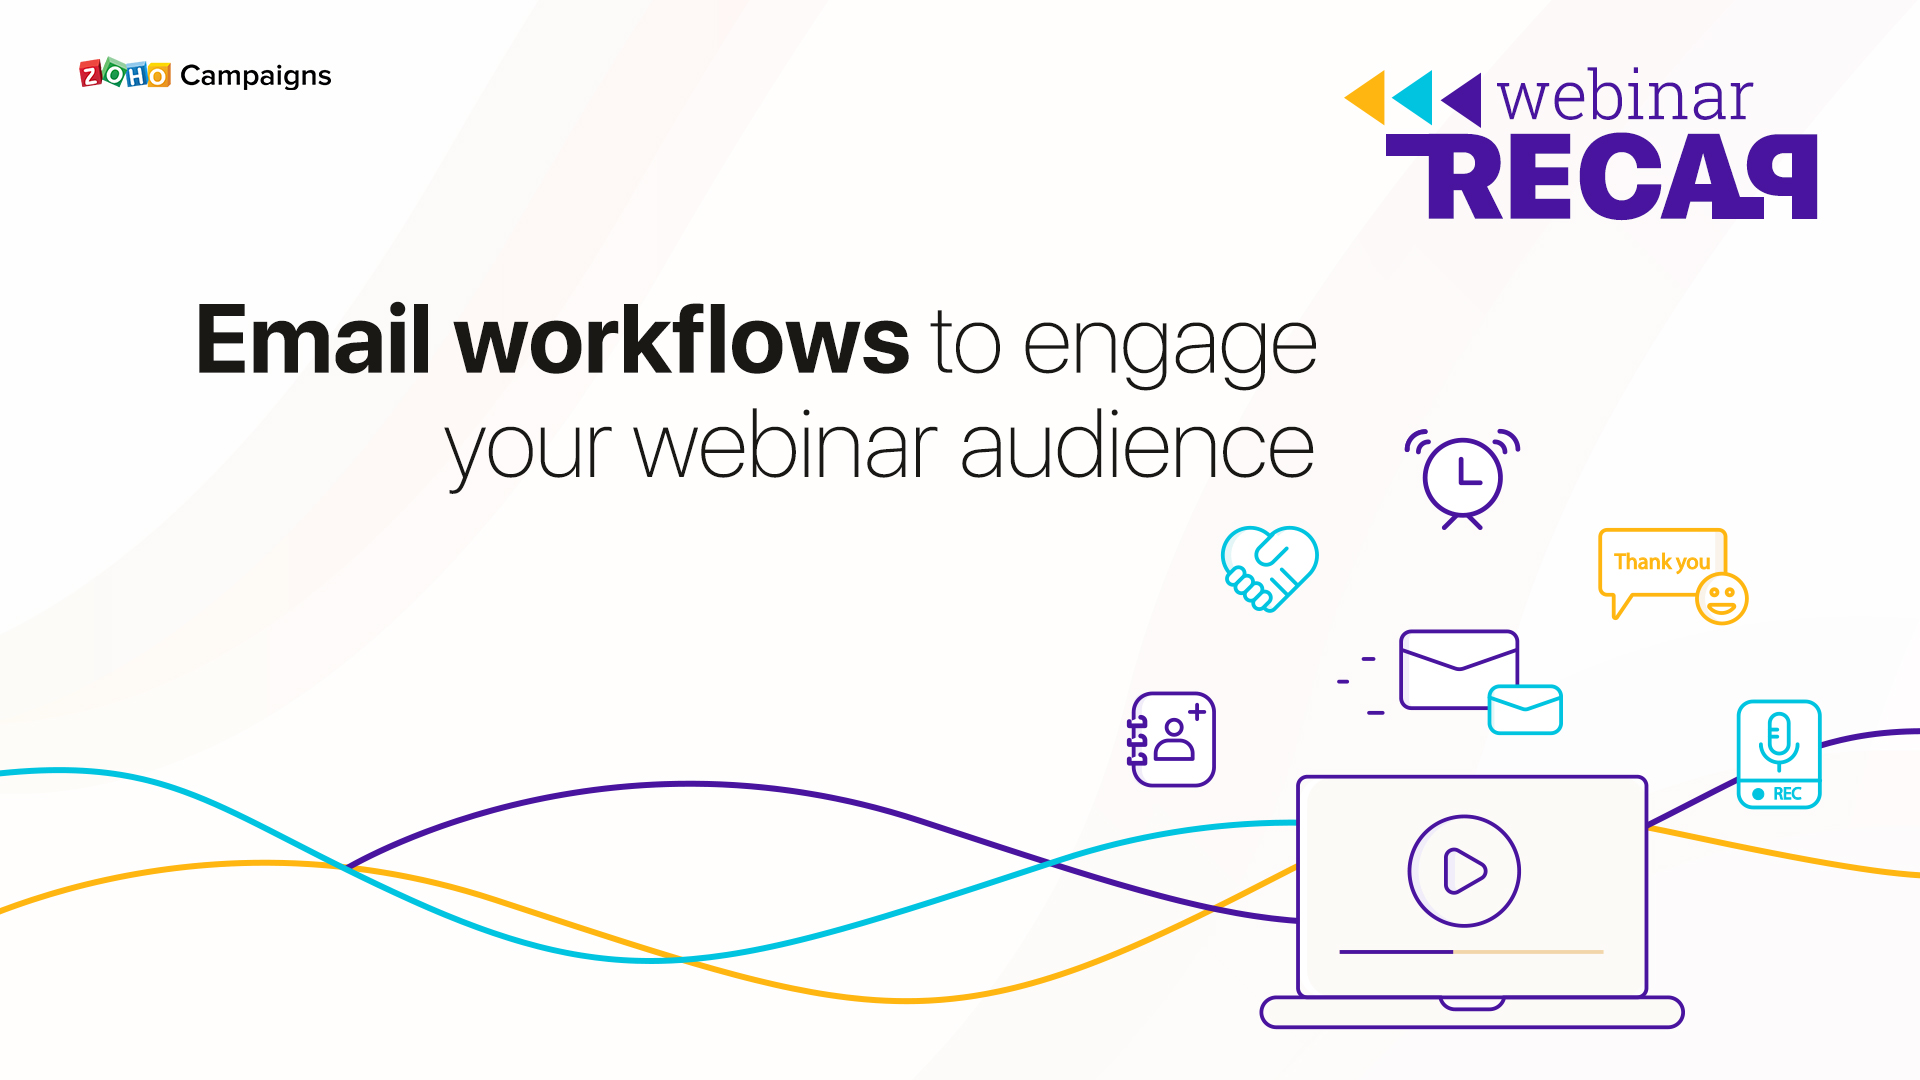 Email workflows to engage your webinar audience